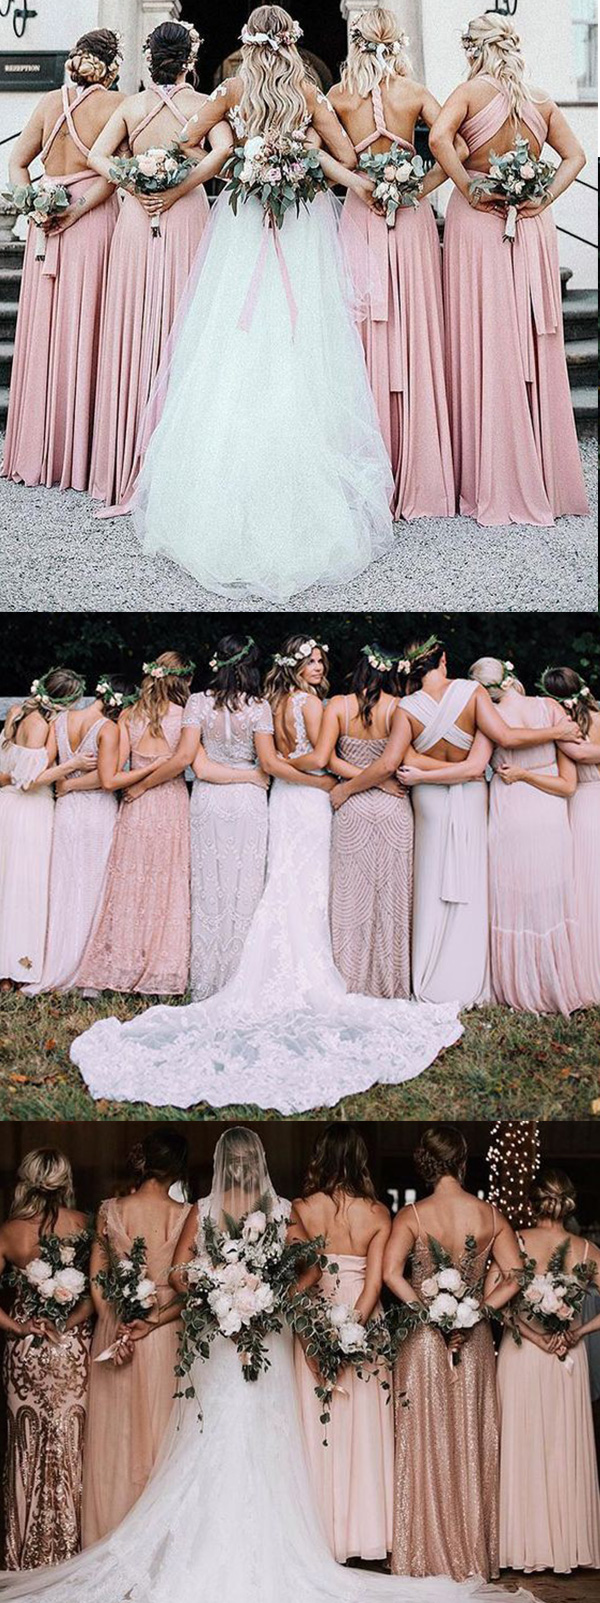 2 Pink wedding ideas beautiful bridesmaids back with colorful bouquets show their happiness